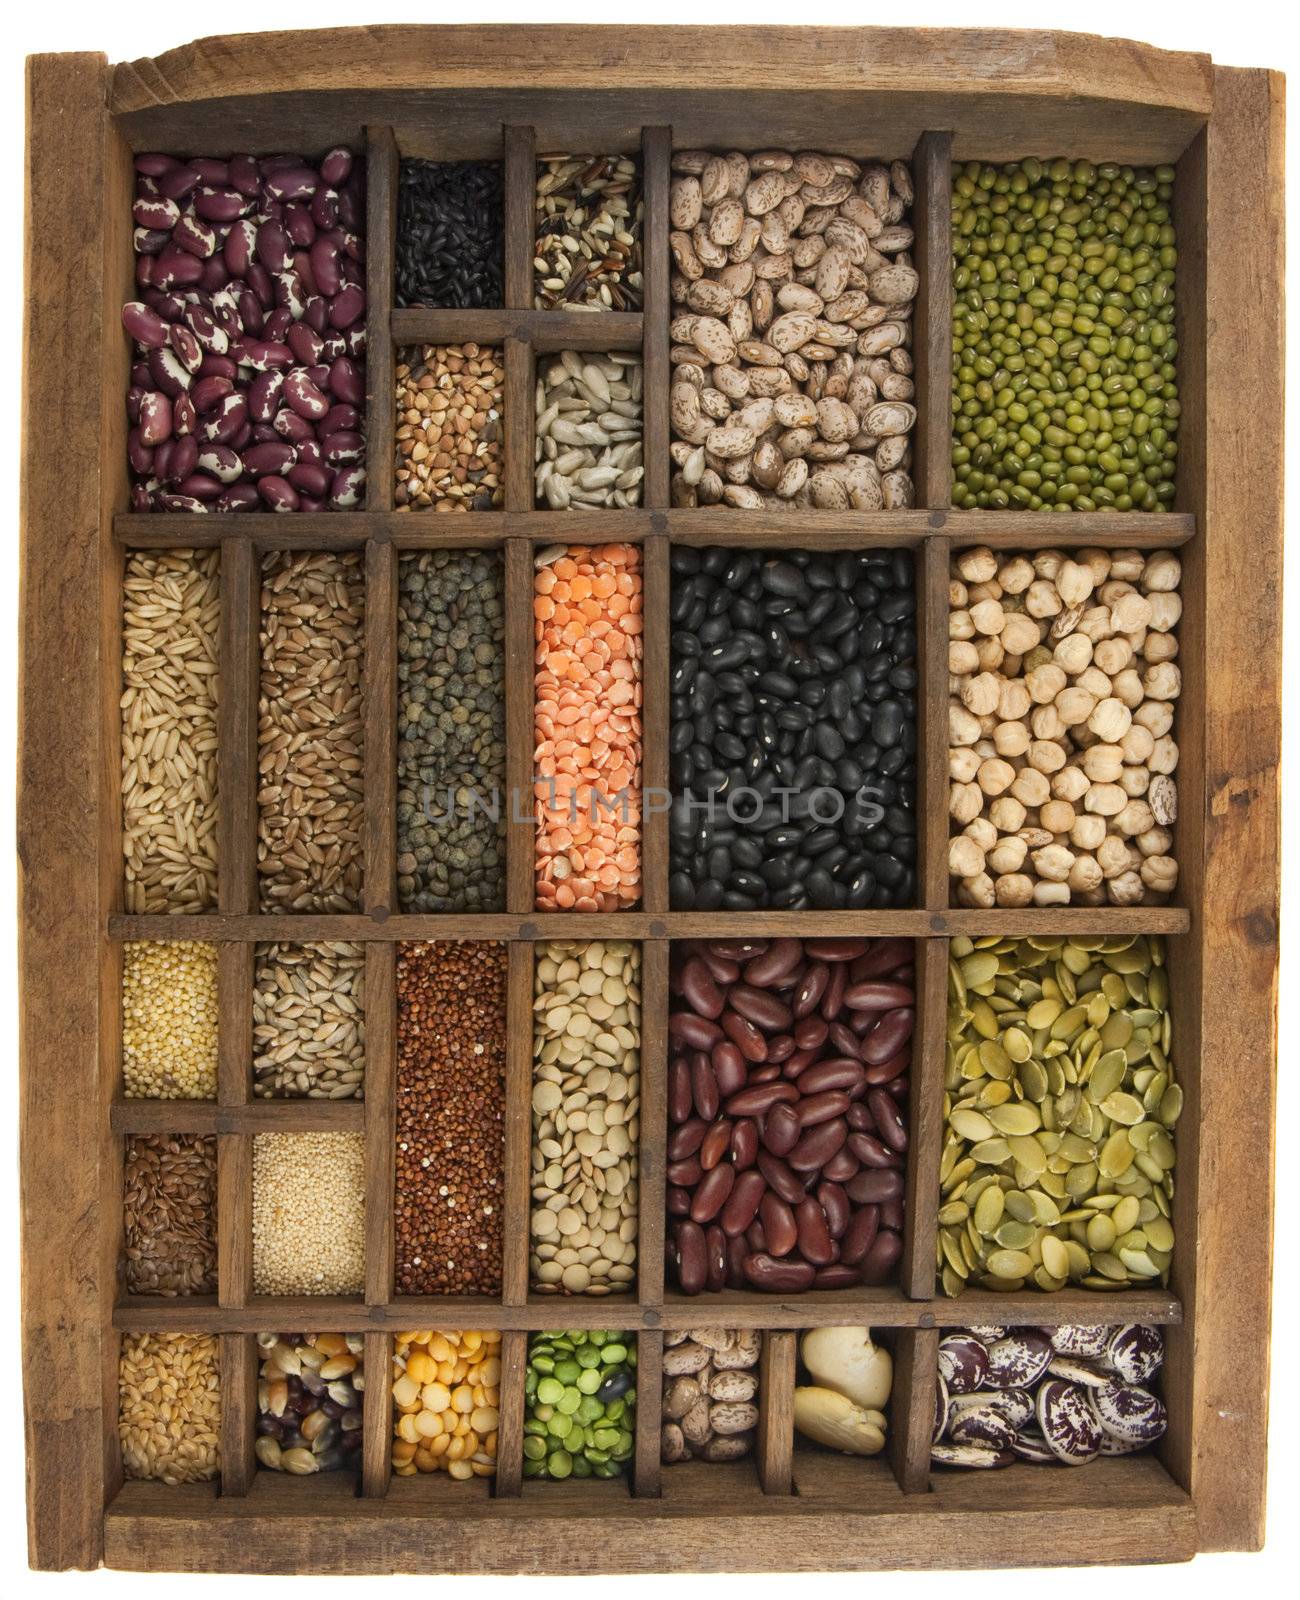 beans, grains, seeds in vintage typesetter box by PixelsAway